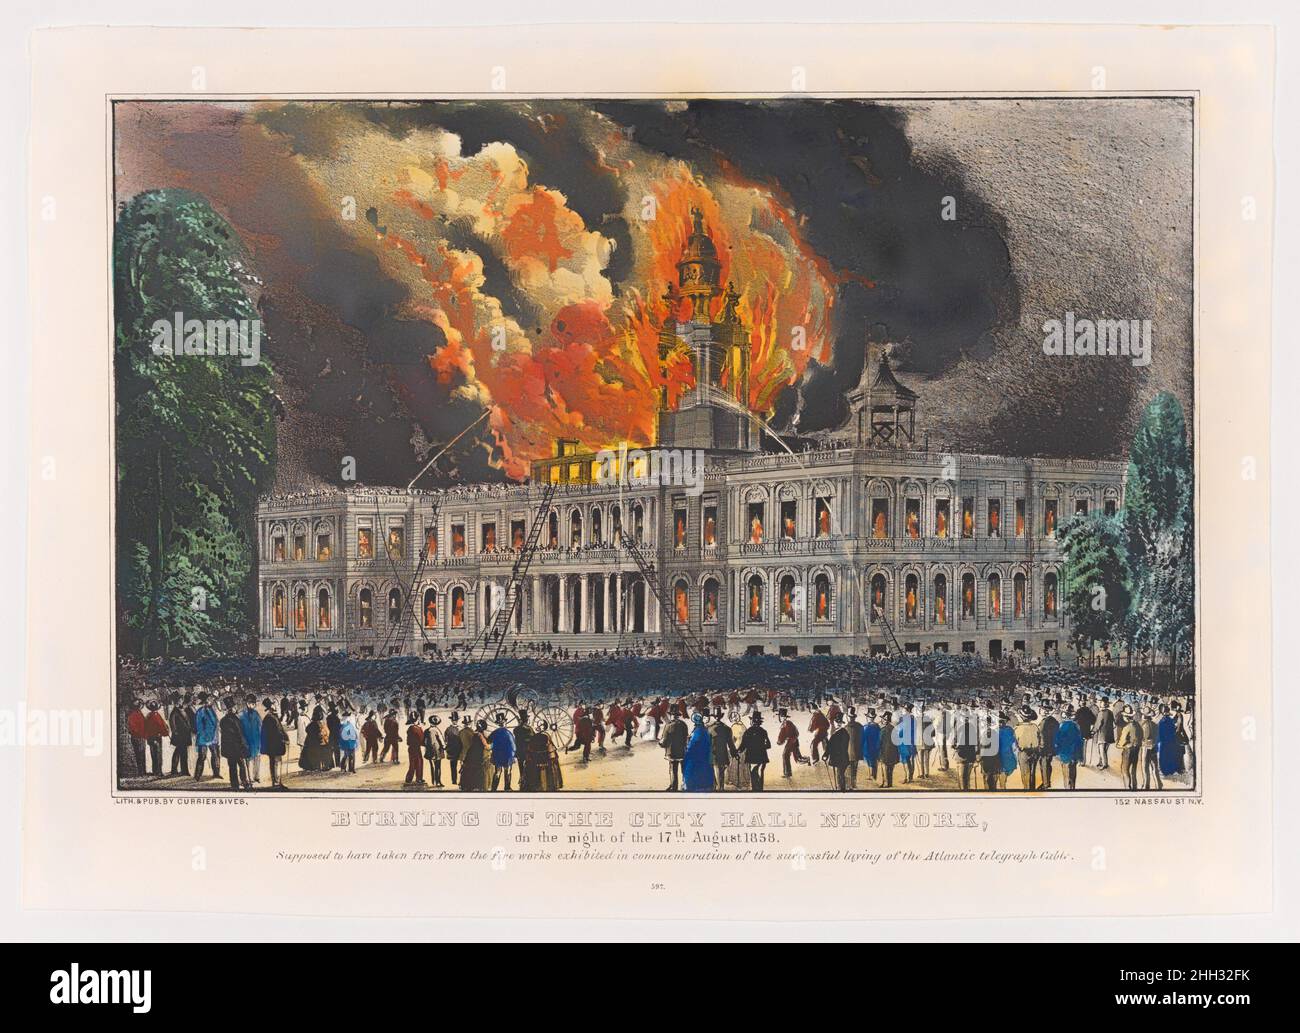 Burning of the City Hall New York, on the night of the 17th August 1858 – Supposed to have taken fire from the fire works exhibited in commemoration of the successful laying of the Atlantic telegraph cable 1858 Lithographed and published by Currier & Ives American A fireworks display in 1858 led to the near destruction of New York’s City Hall. The occasion was the laying of the first transatlantic telegraph cable. When the USS Niagara arrived in Brooklyn from Newfoundland, where the cable came ashore in North America, New York responded by illuminating public buildings and shooting pyrotechnic Stock Photo